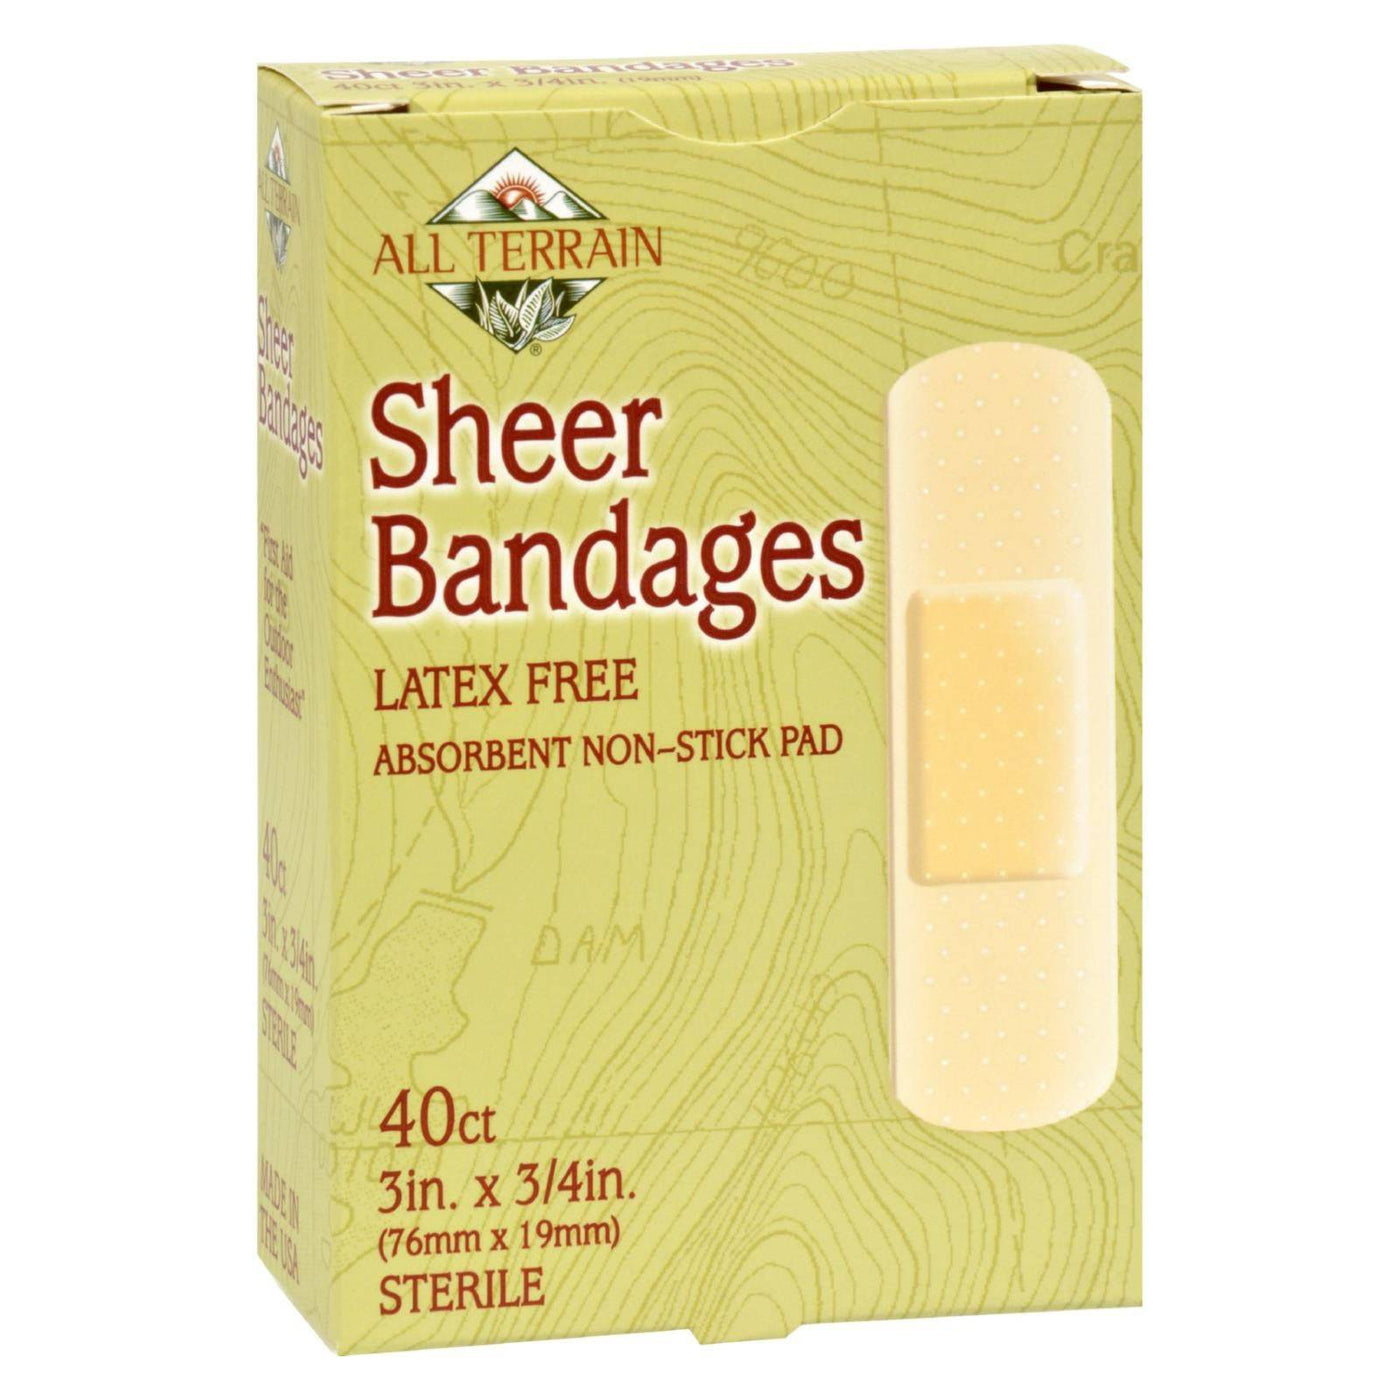 All Terrain - Bandages - Sheer - 3-4 In X 3 In - 40 Ct | OnlyNaturals.us